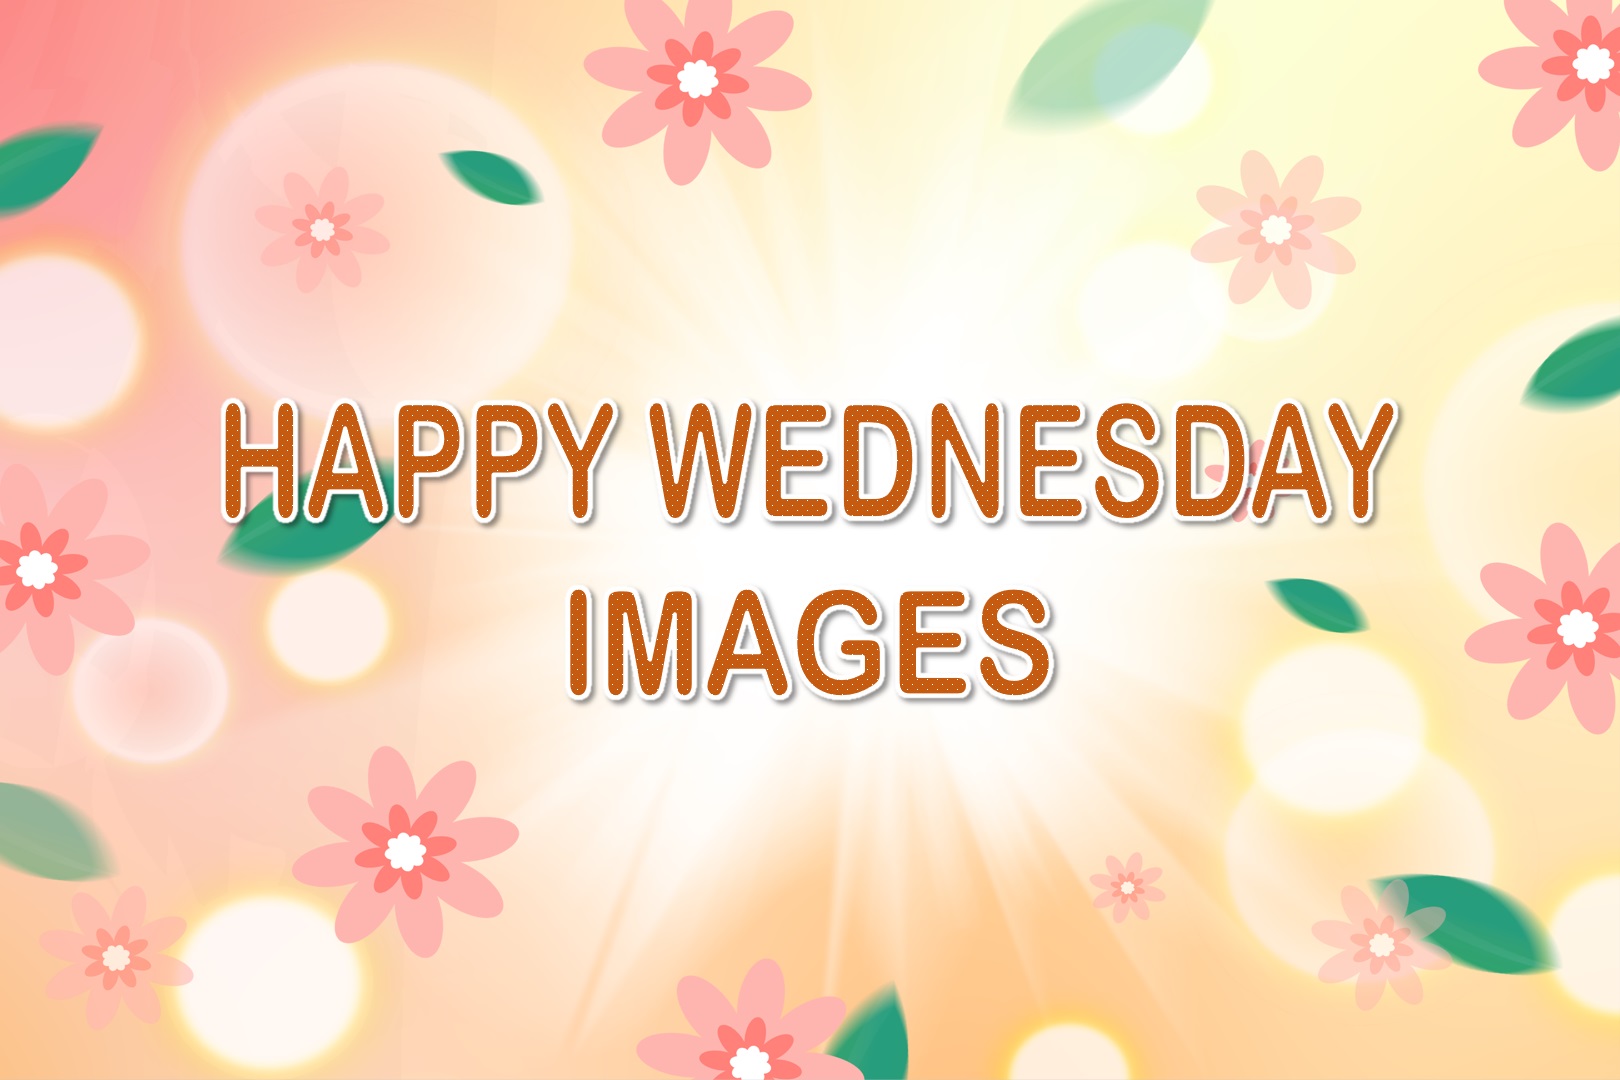 Happy Wednesday Images | Beautiful Wednesday Pictures | SuperbWishes